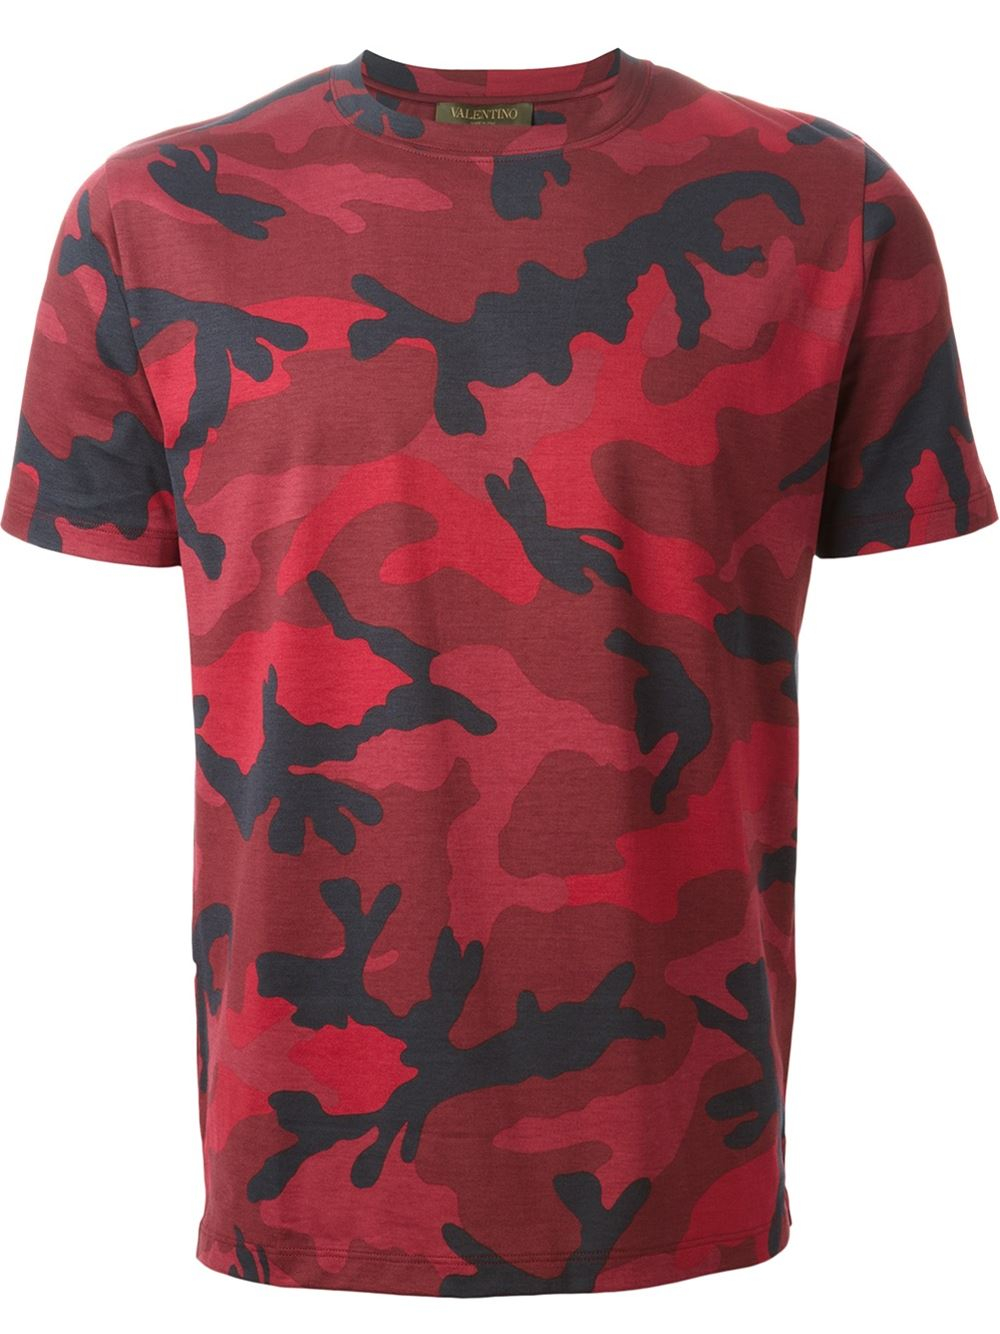 Valentino 'Rockstud' Camouflage T-Shirt in Red for Men | Lyst